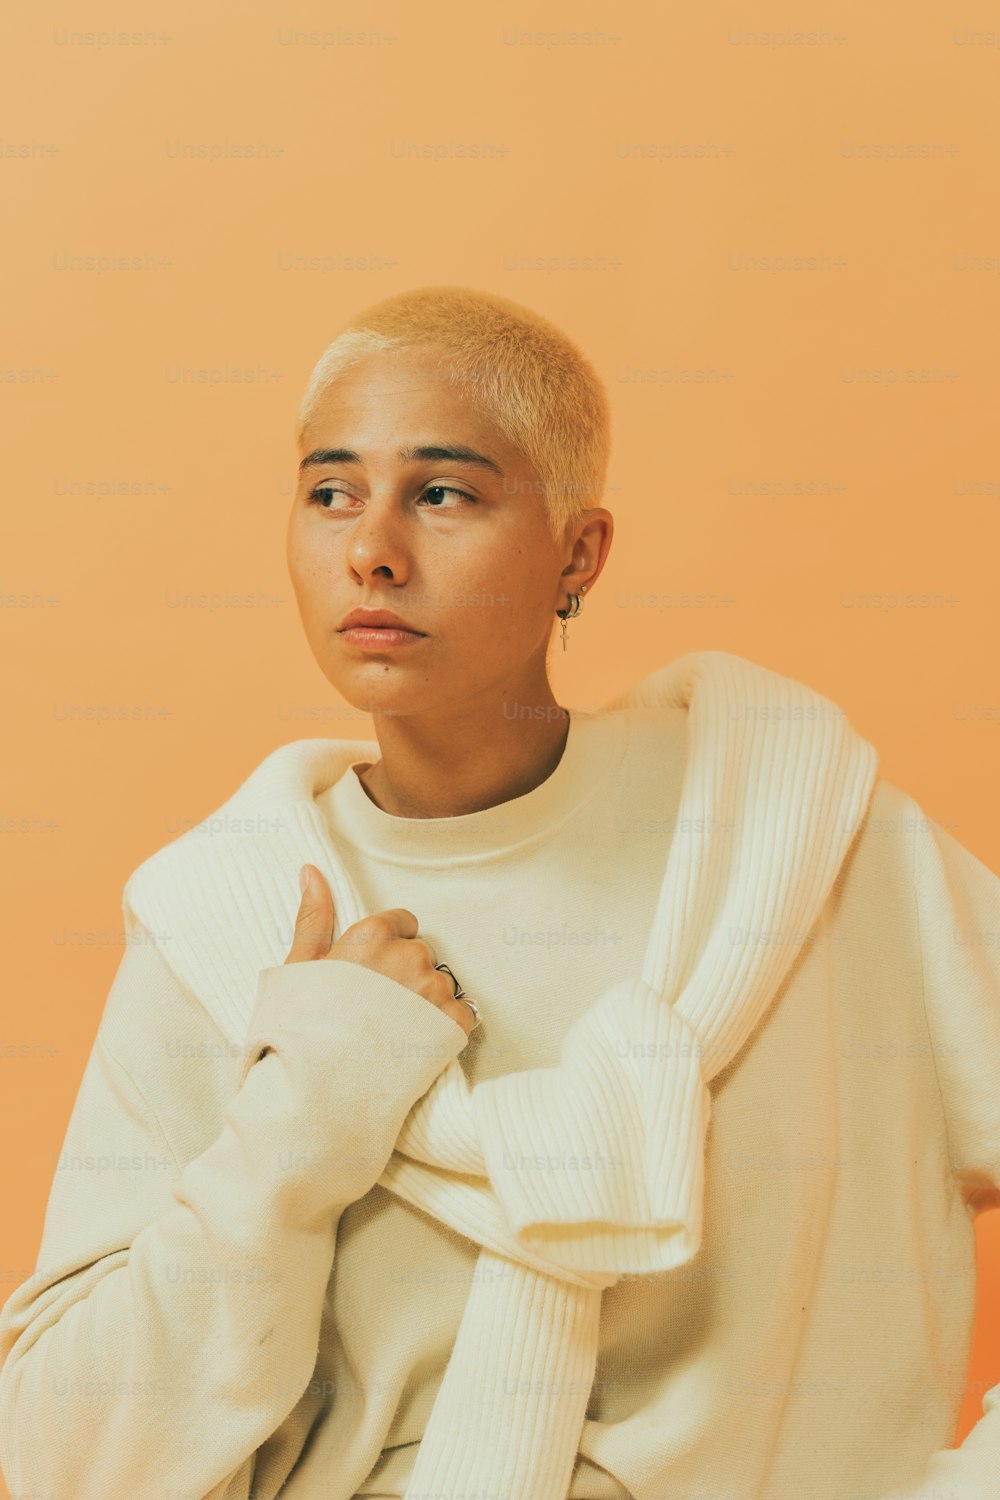 a man with a shaved head wearing a white sweater